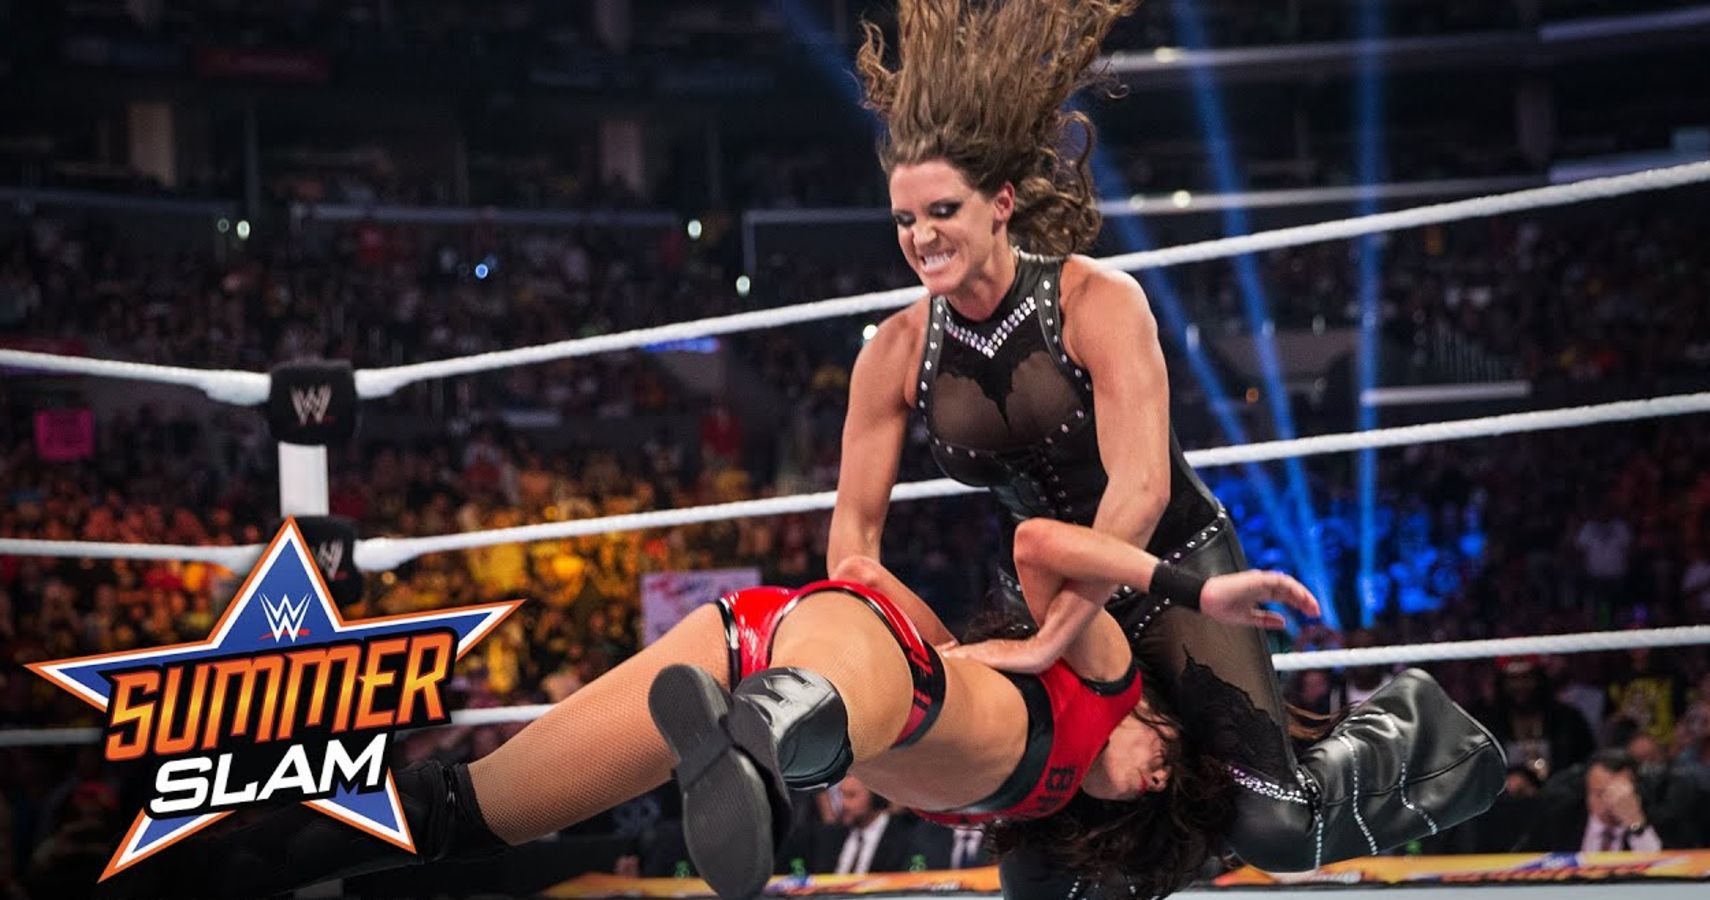 WWE's Chief Brand Officer Stephanie McMahon performs a Pedigree on Brie Bella at SummerSlam 2014